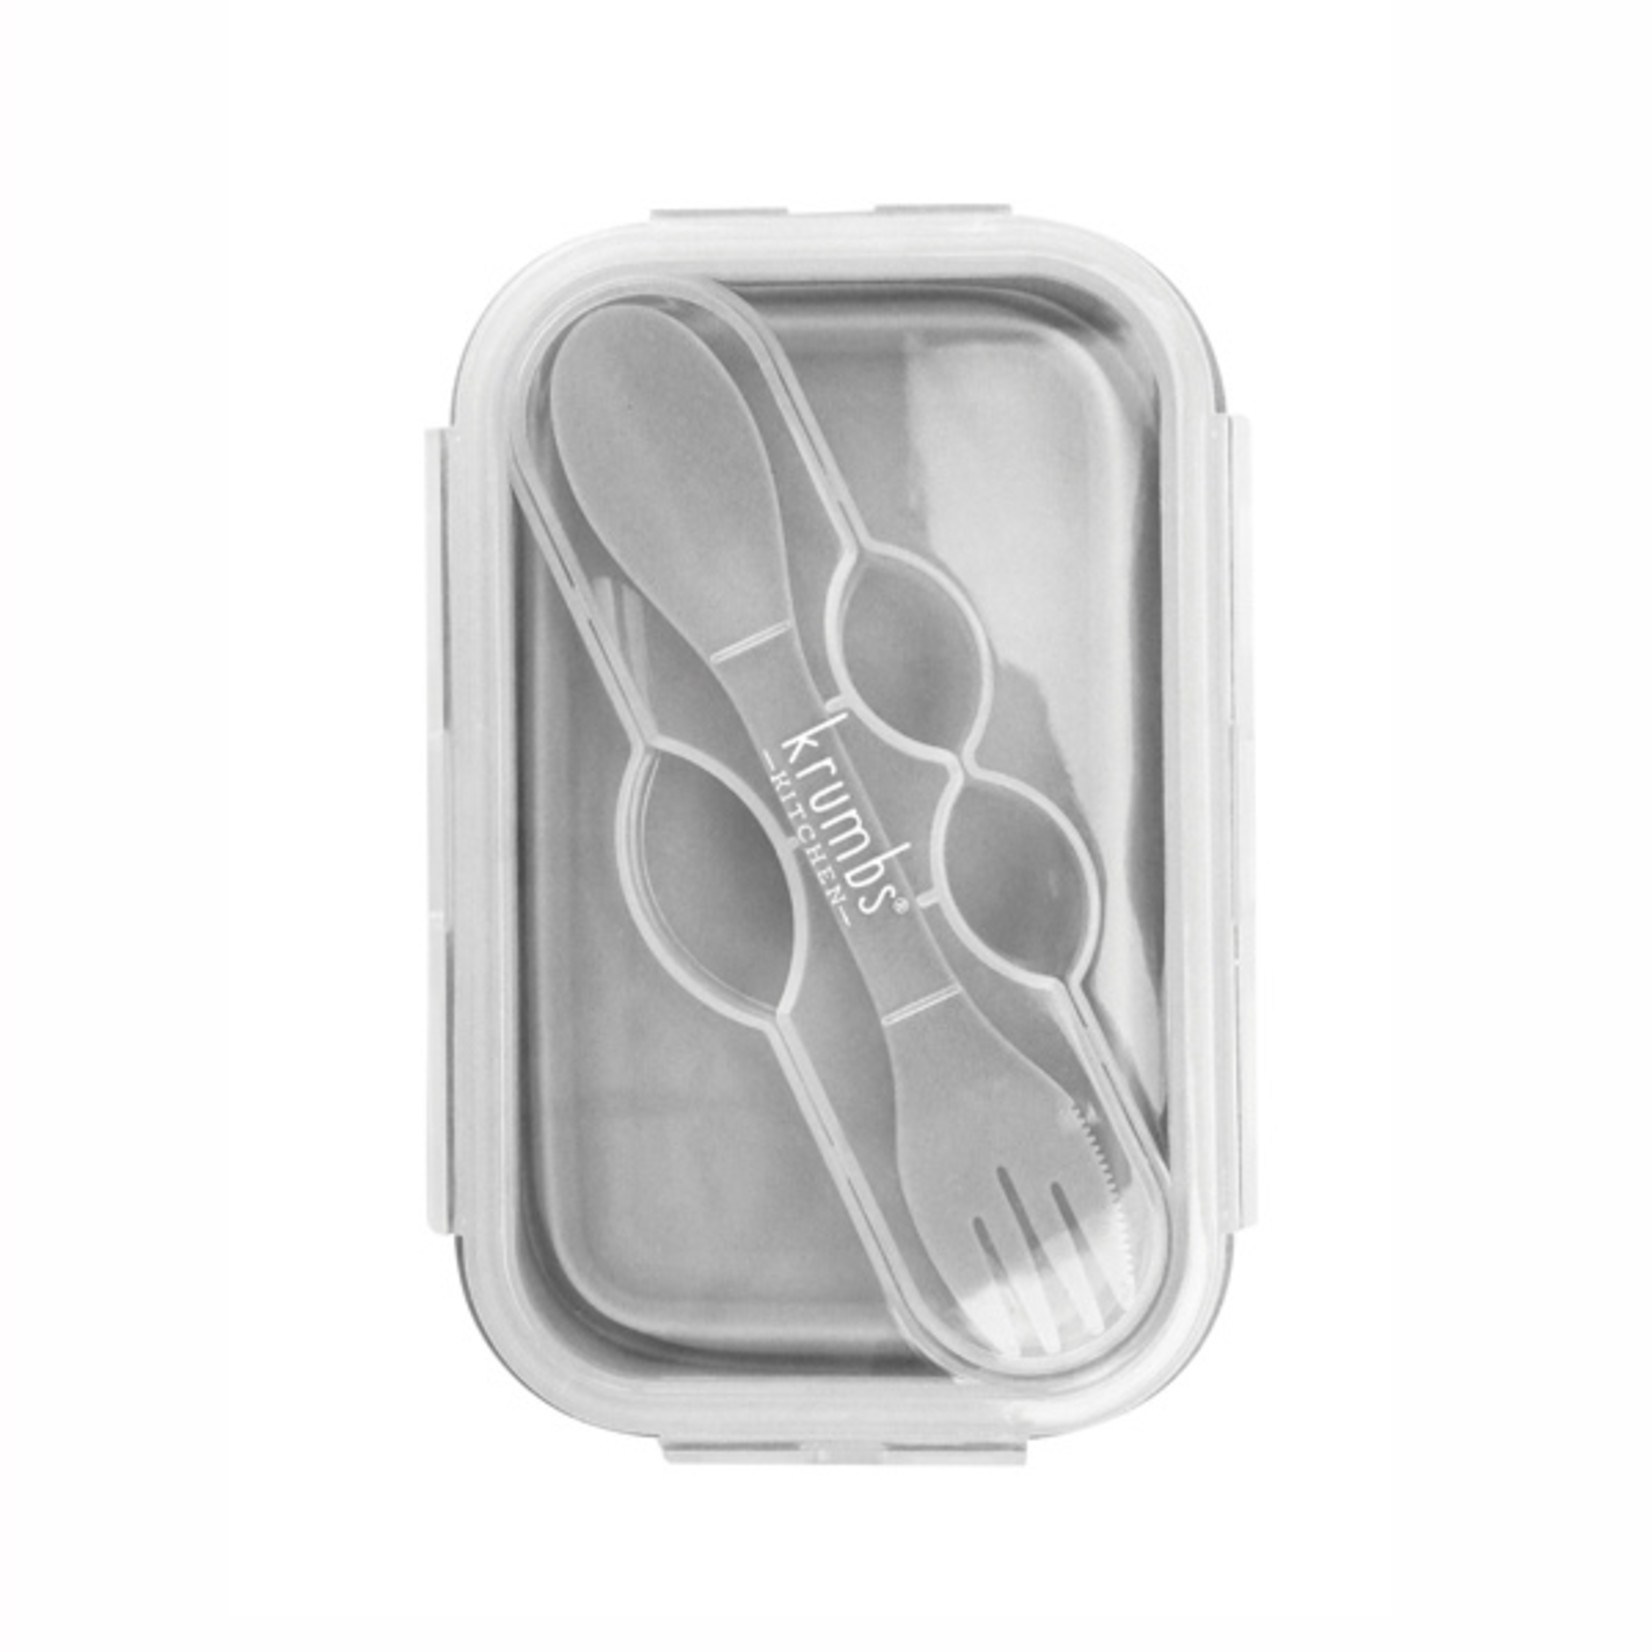 DM Merchandising Krumbs Kitchen - Collapsible Silicone Lunch Container - Gray